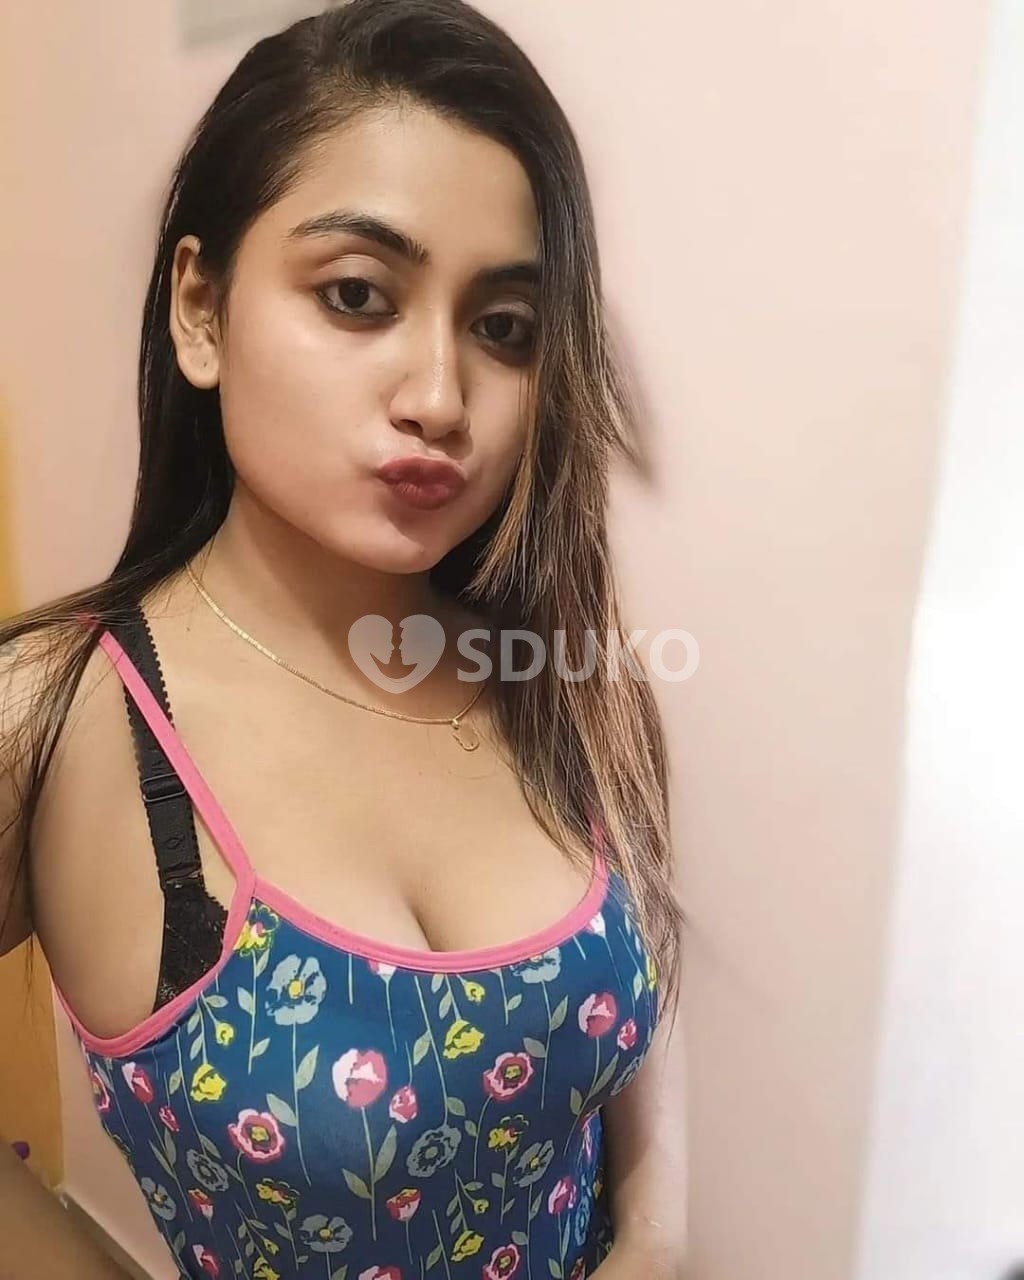 Mg road ❣️❣️Low price high profile college girl and aunty available any time available service genuine vip call 